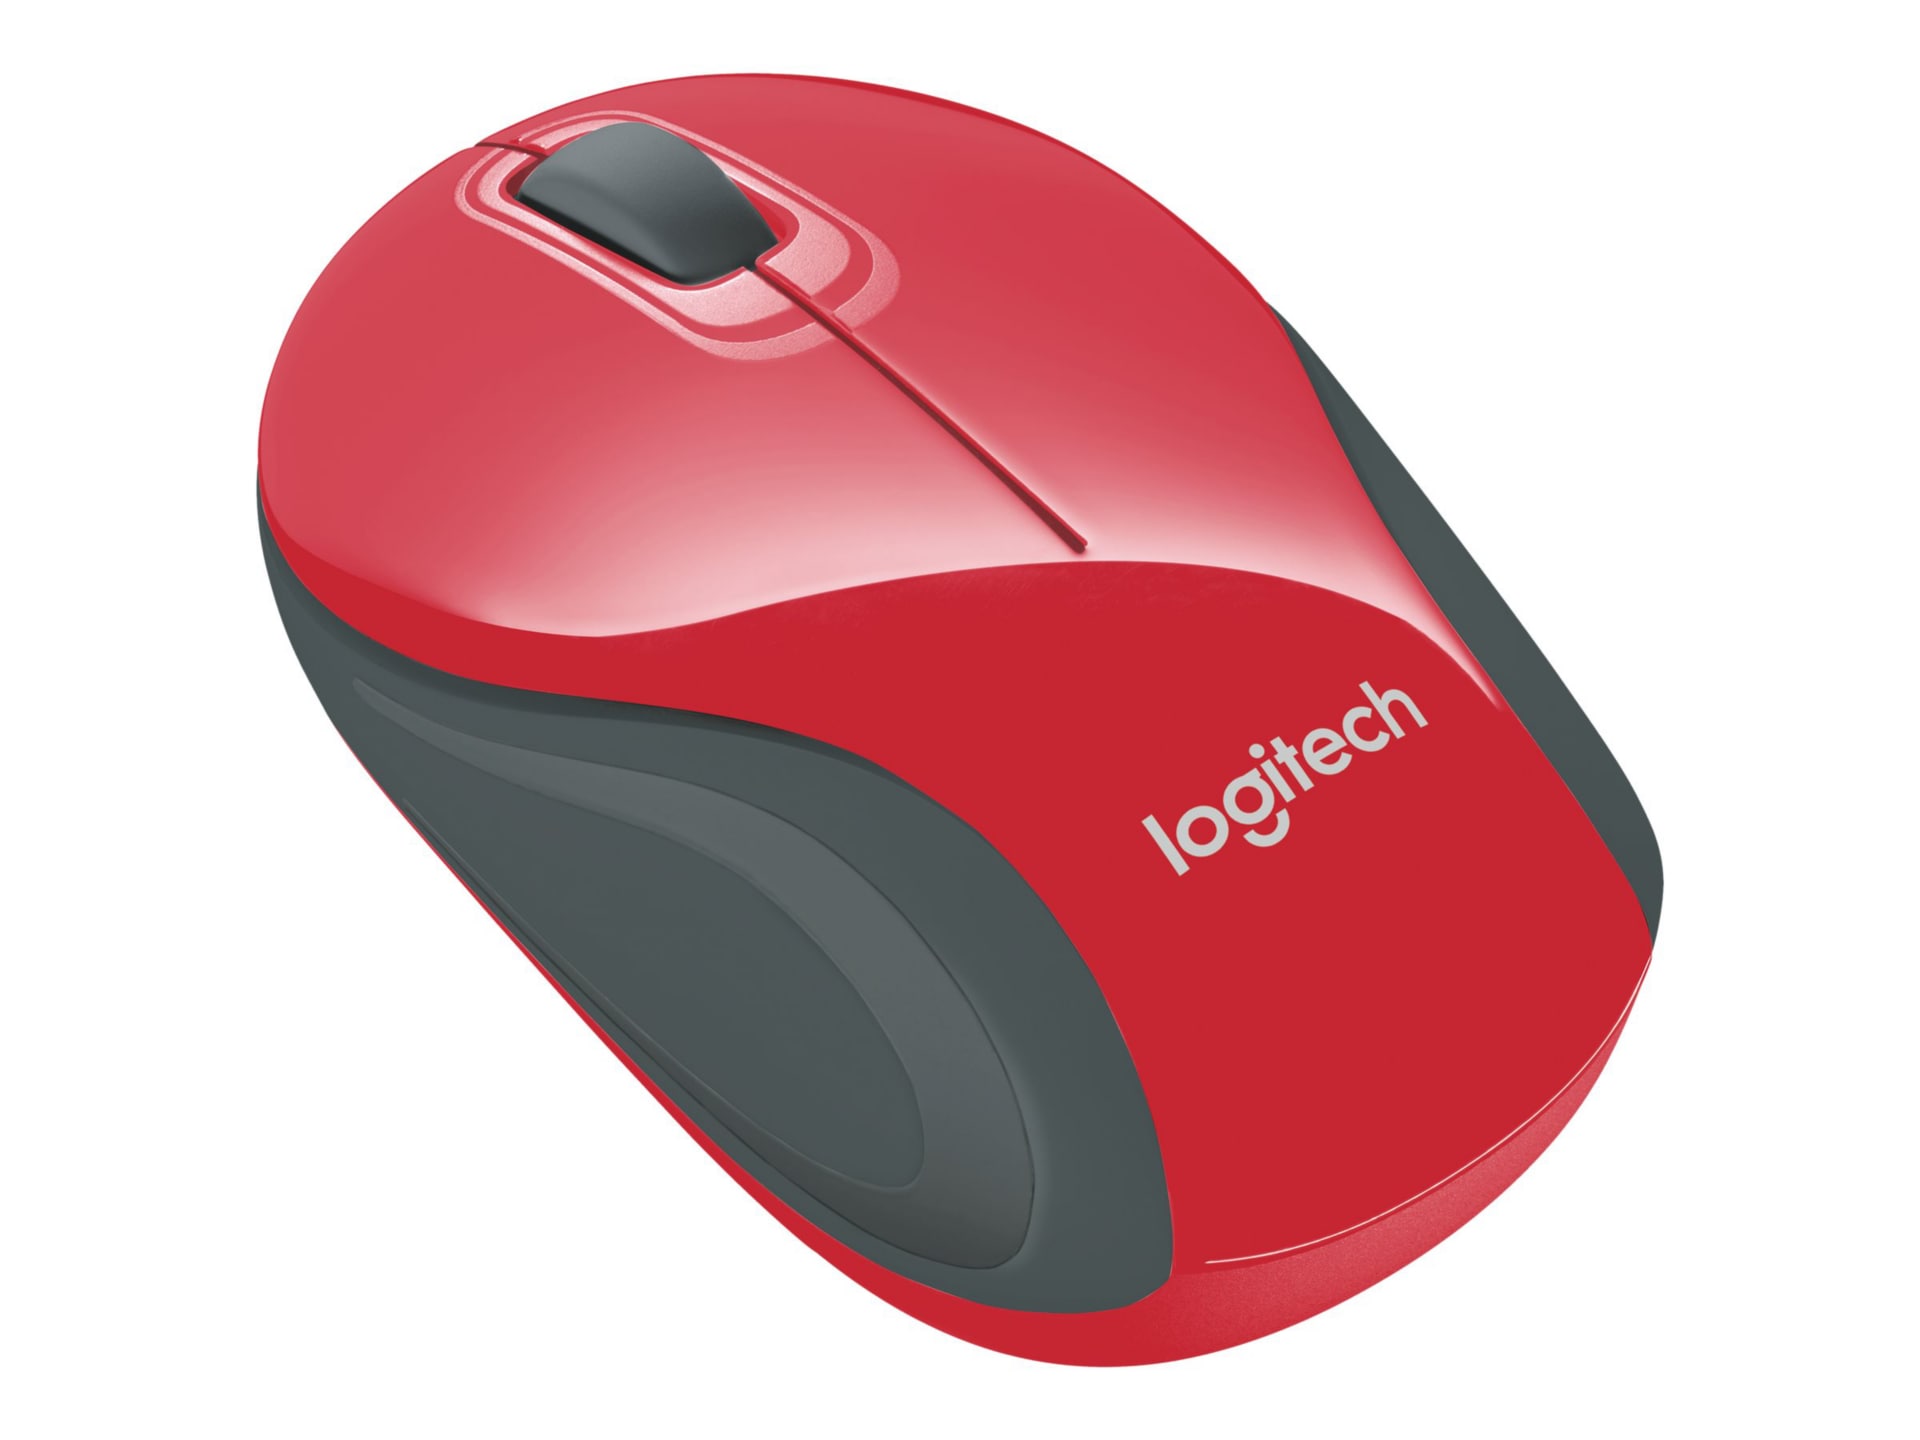 M187 Mice 2.4 red - - - GHz mouse Logitech - 910-002727 -